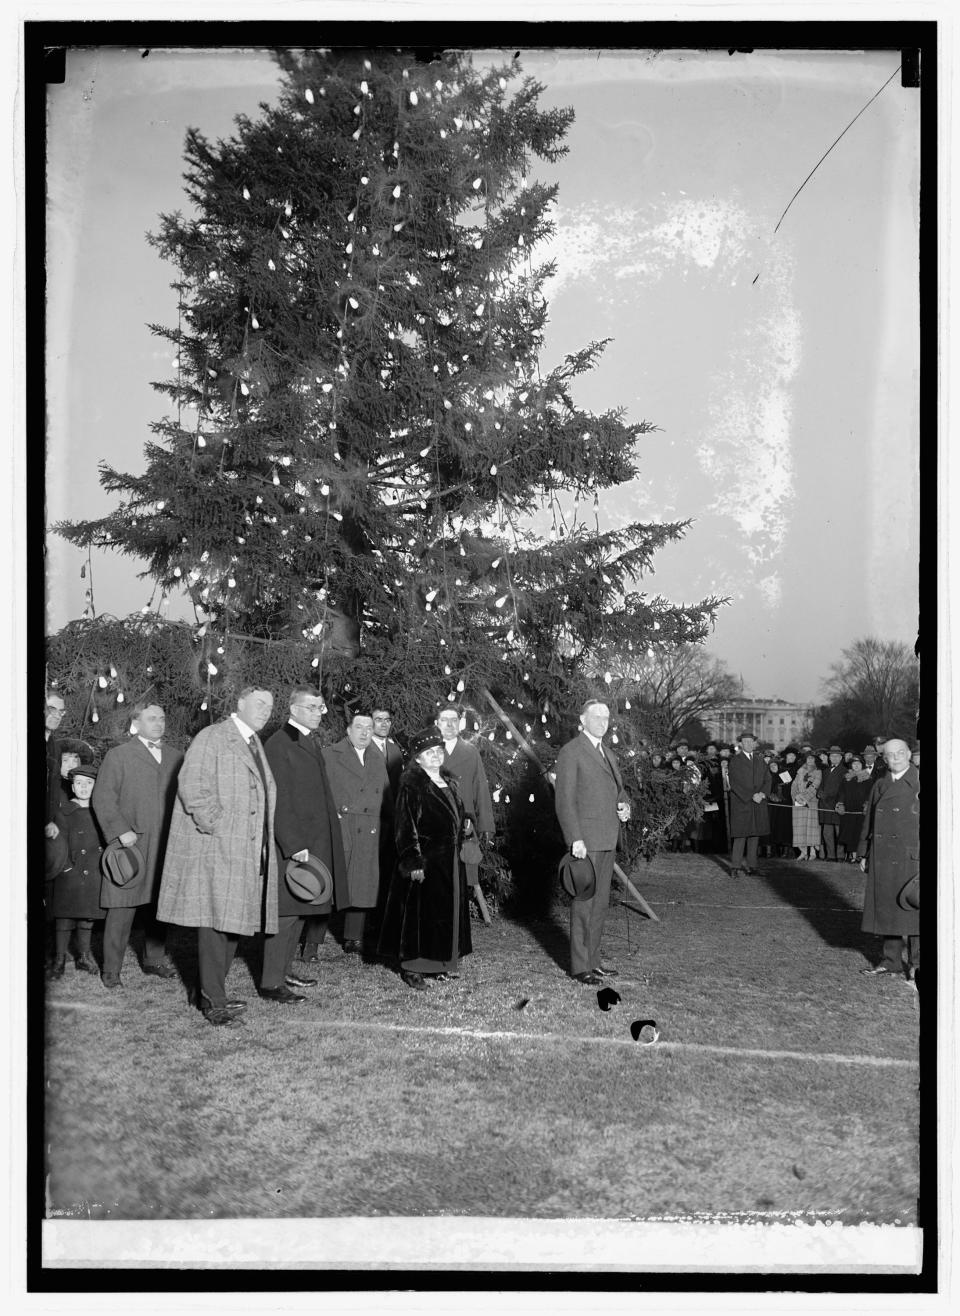 This photograph is of President Calvin Coolidge lighting the National Christmas Tree on Christmas Eve 1923. Since then, the annual lighting of the National Christmas Tree has become a treasured holiday tradition in Washington, D.C.